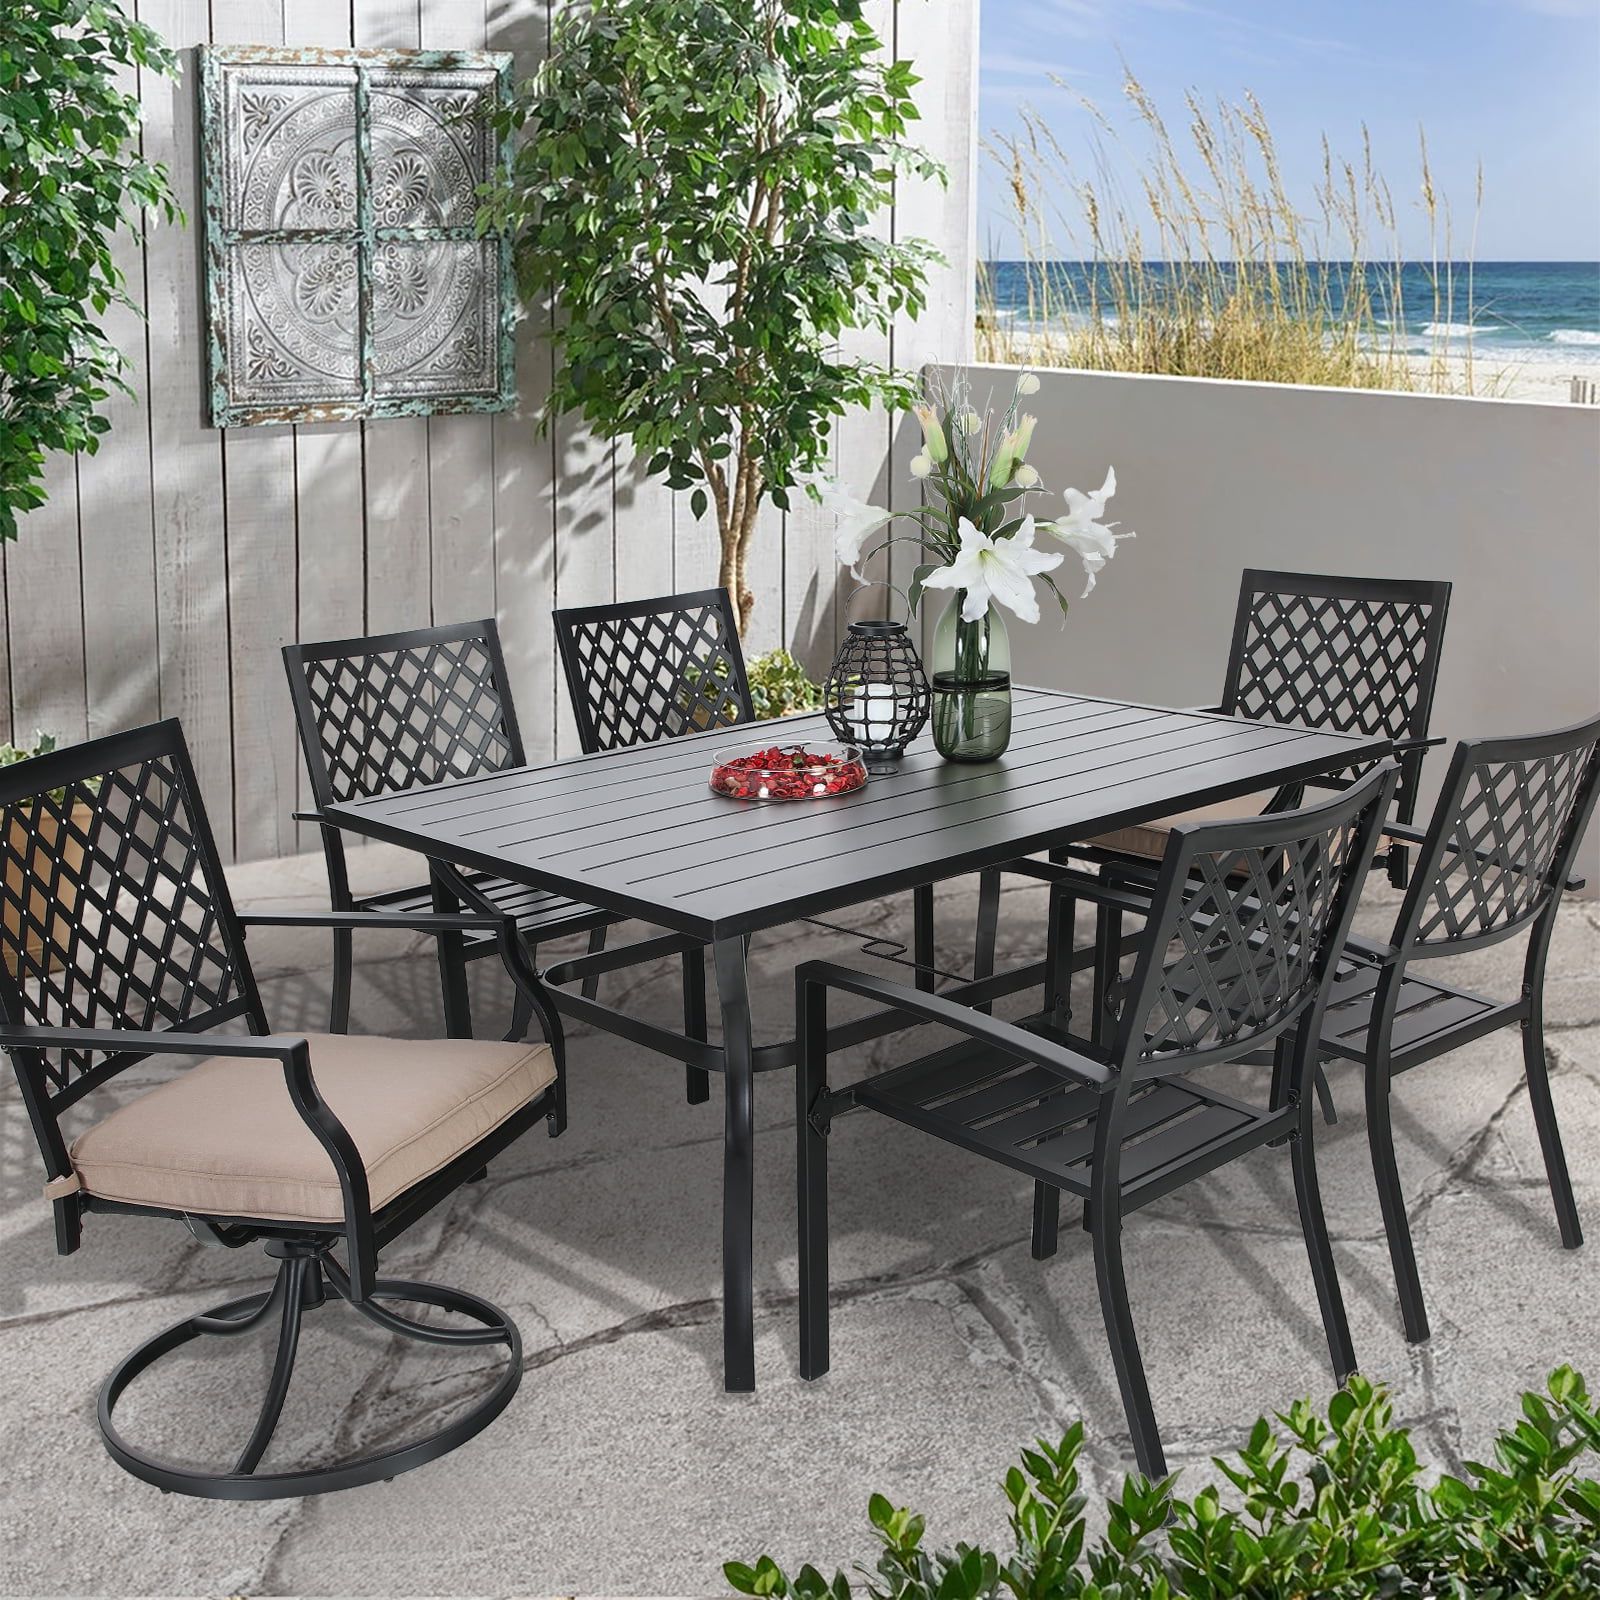 Current Outdoor Furniture Metal Rectangular Tables In Mf Studio 7 Piece Outdoor Patio Dining Set Metal Furniture With 2 Swivel  Padded Chairs, 4 Stacking Armchairs& 60' X 38" Rectangular Table, 6 Seats  For Dinner&party, Beige Cushion – Walmart (View 14 of 15)